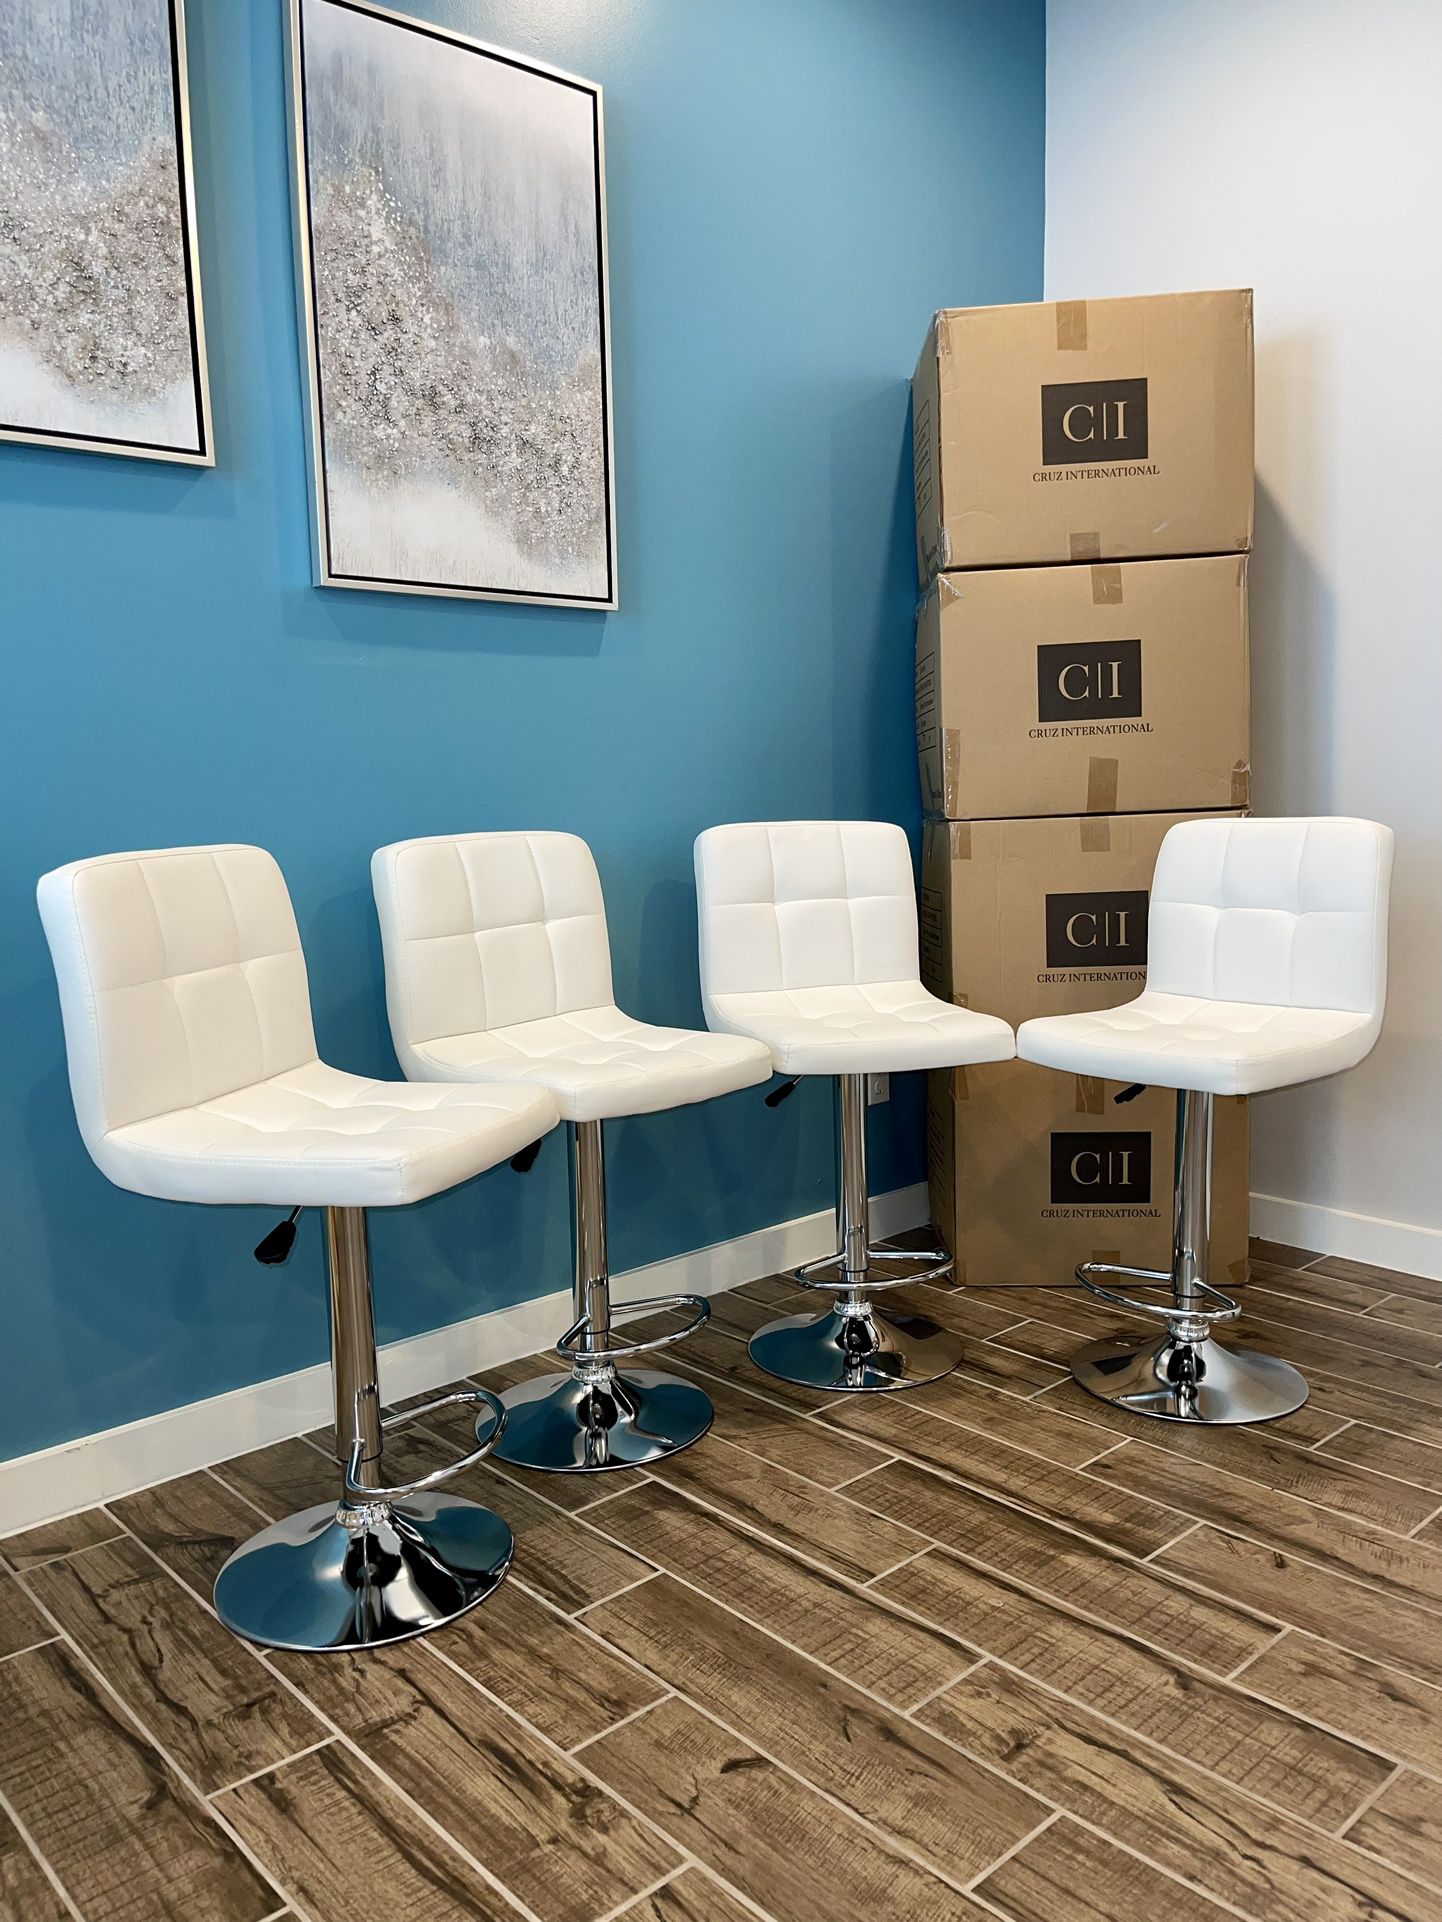 New! $70 EACH White Square Bar Stools Chairs